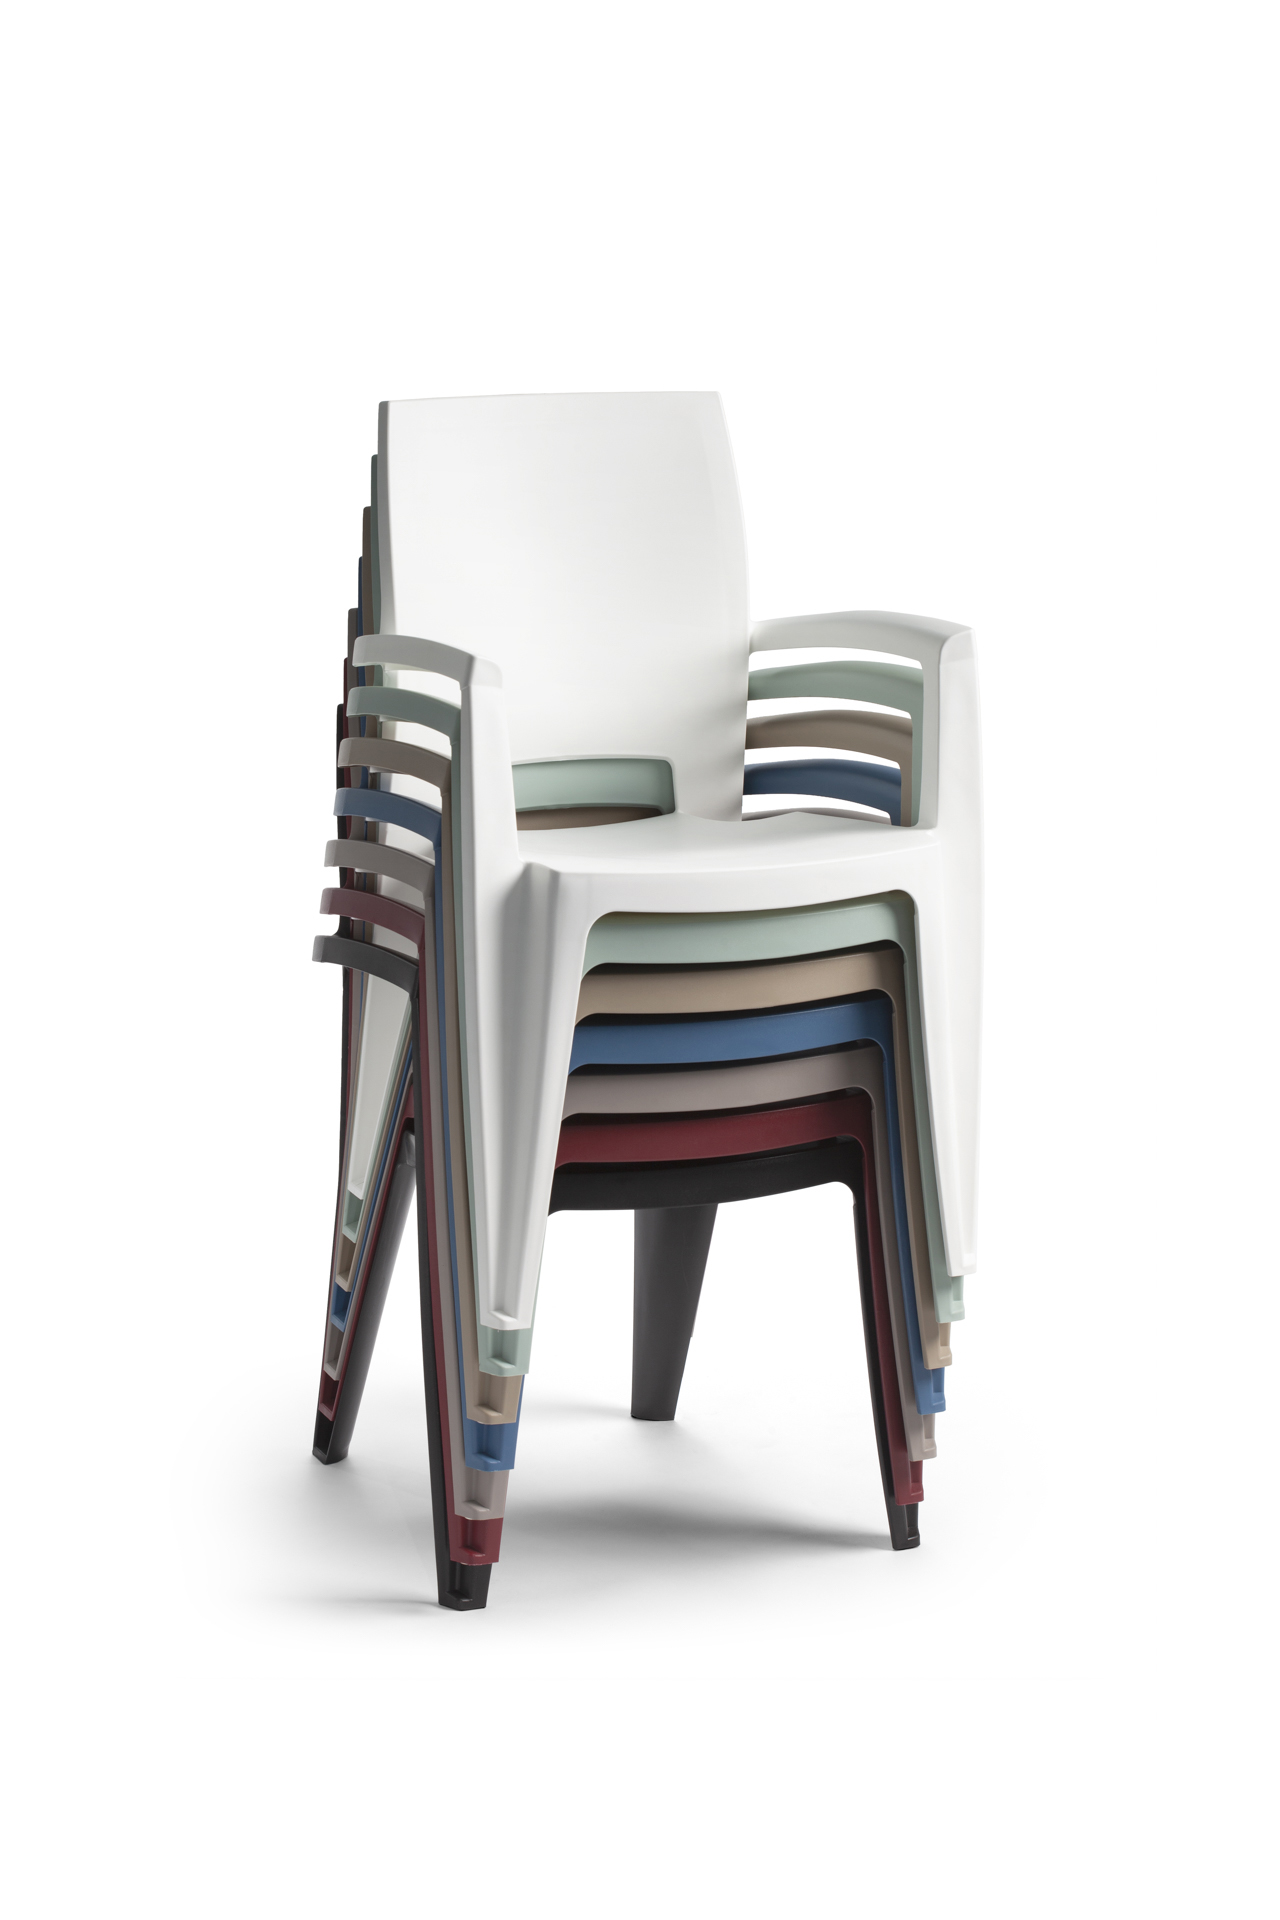 TENSAI_FURNITURE_AVIVA__COLOR_PLASTIC_ARMCHAIR_white_background_stackable_chairs